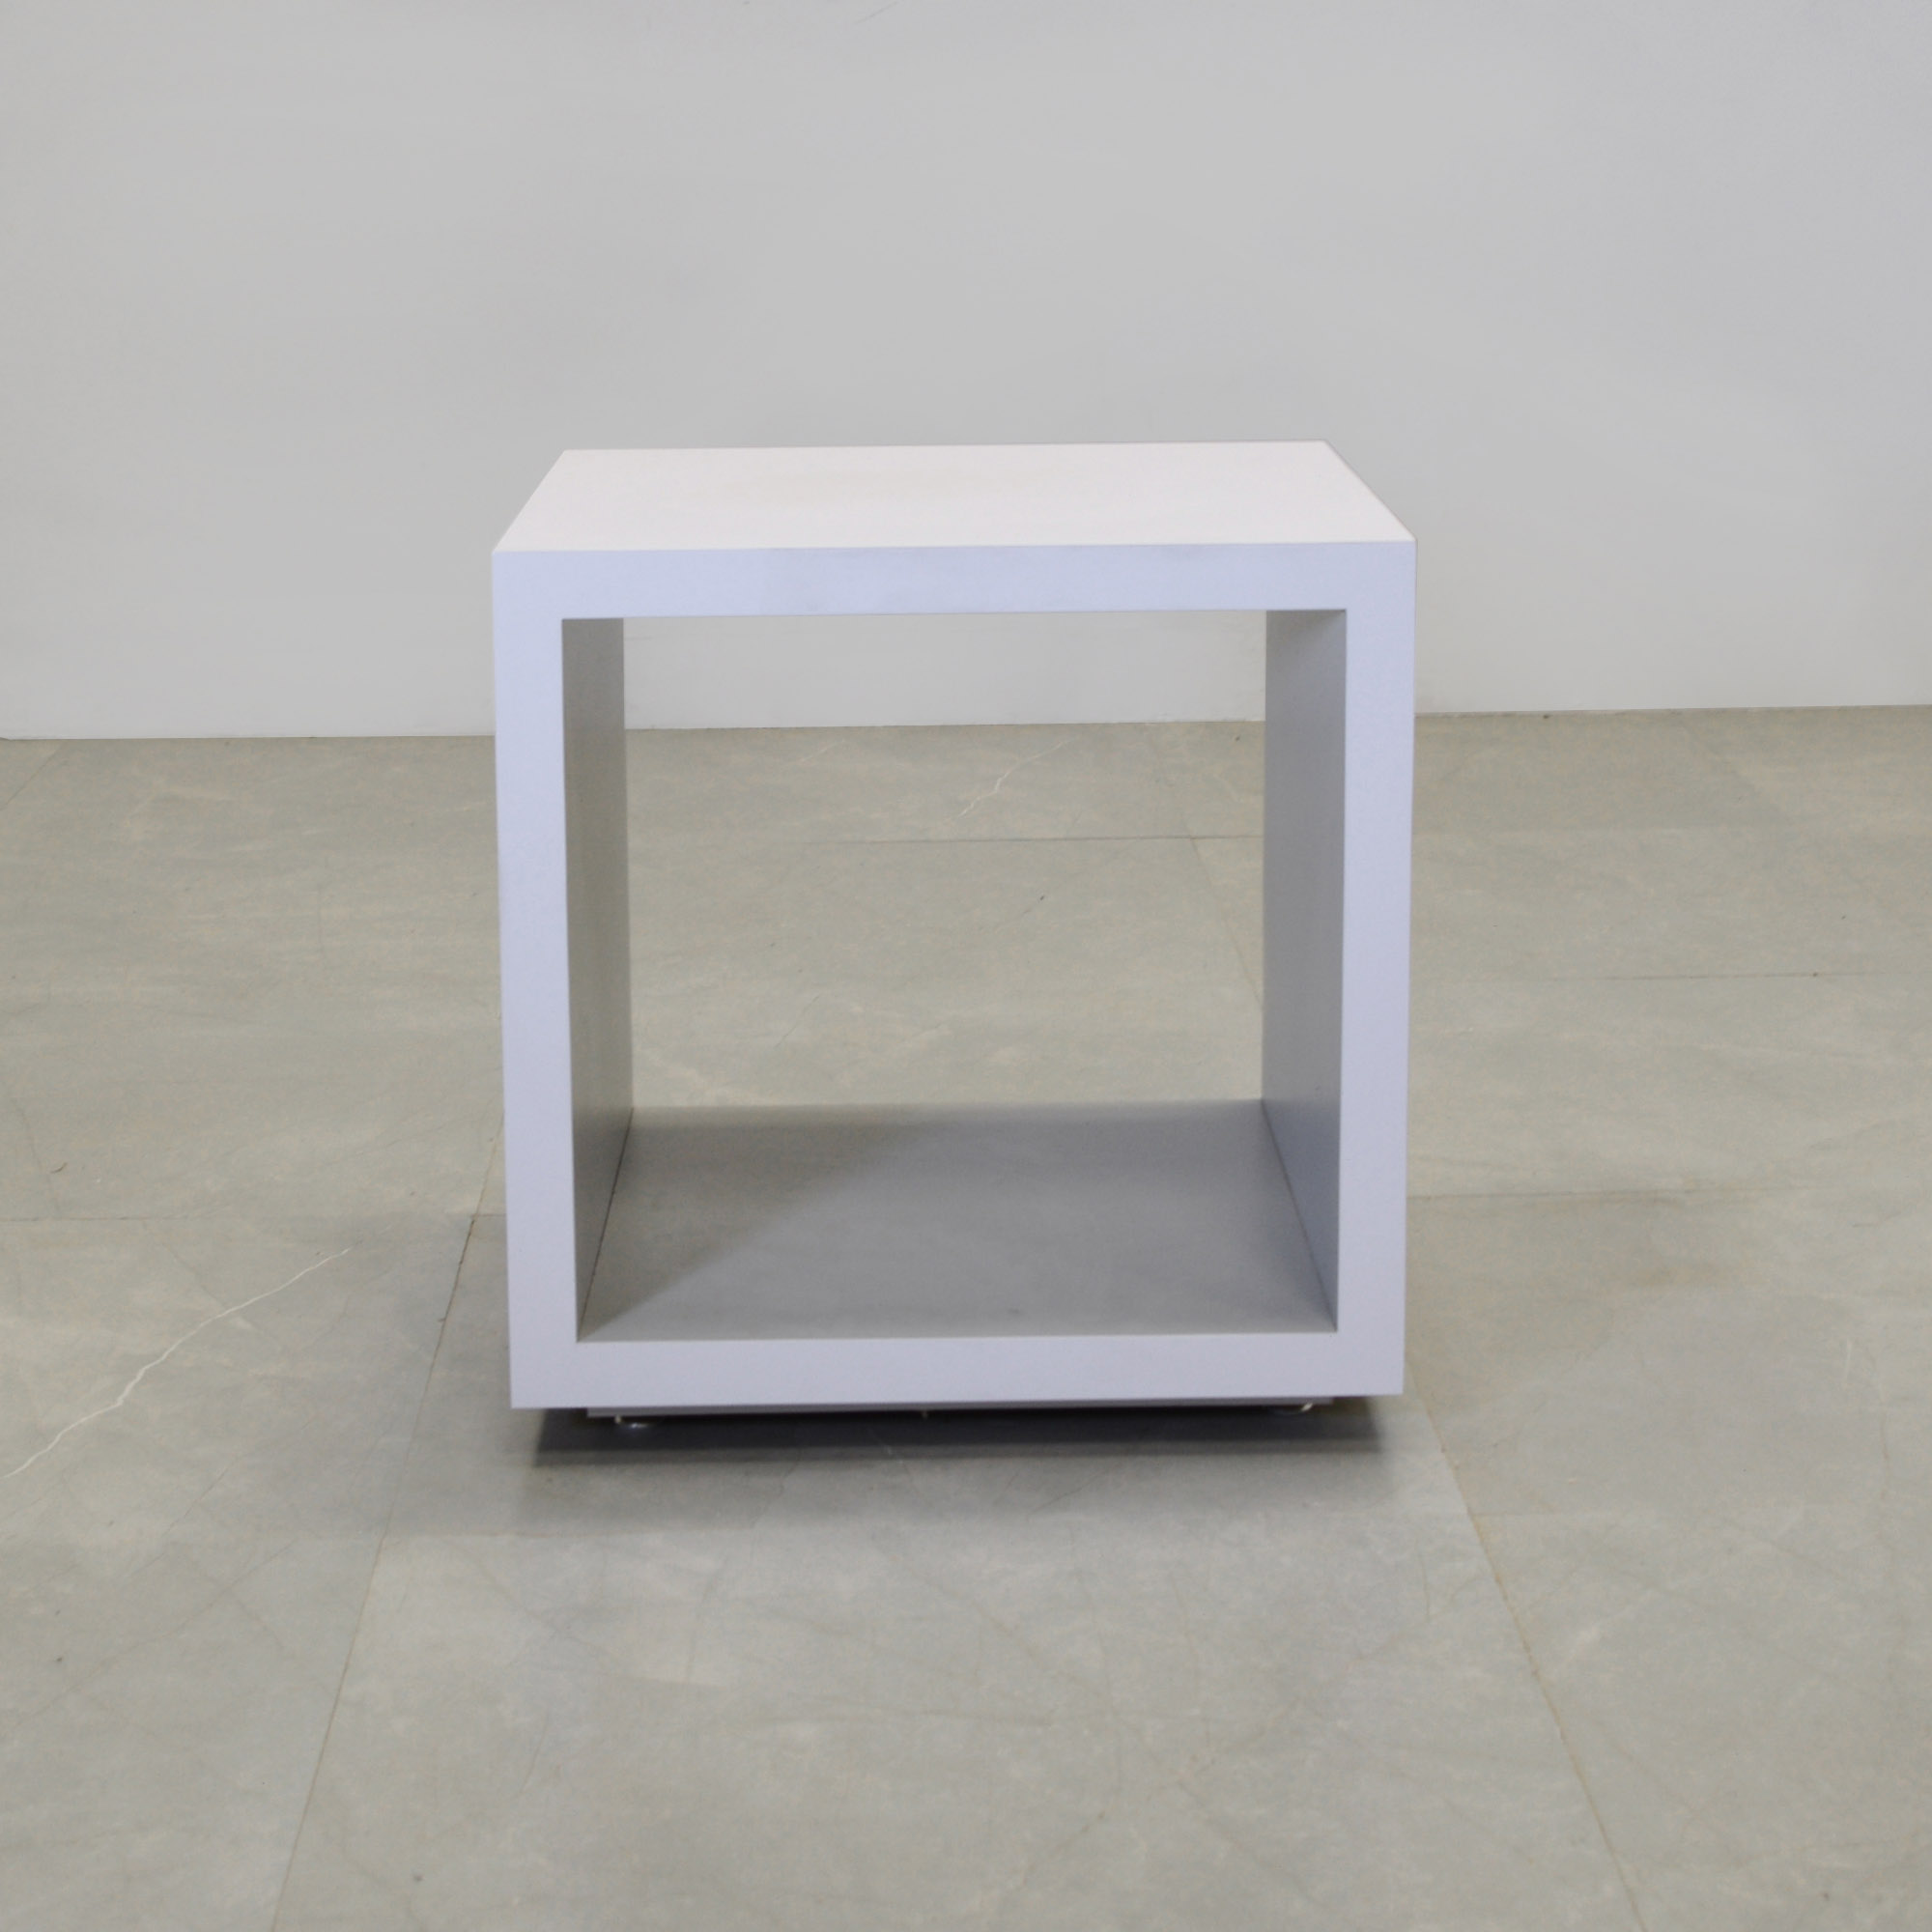 Albany Square Side Table in white matte laminate shown here.